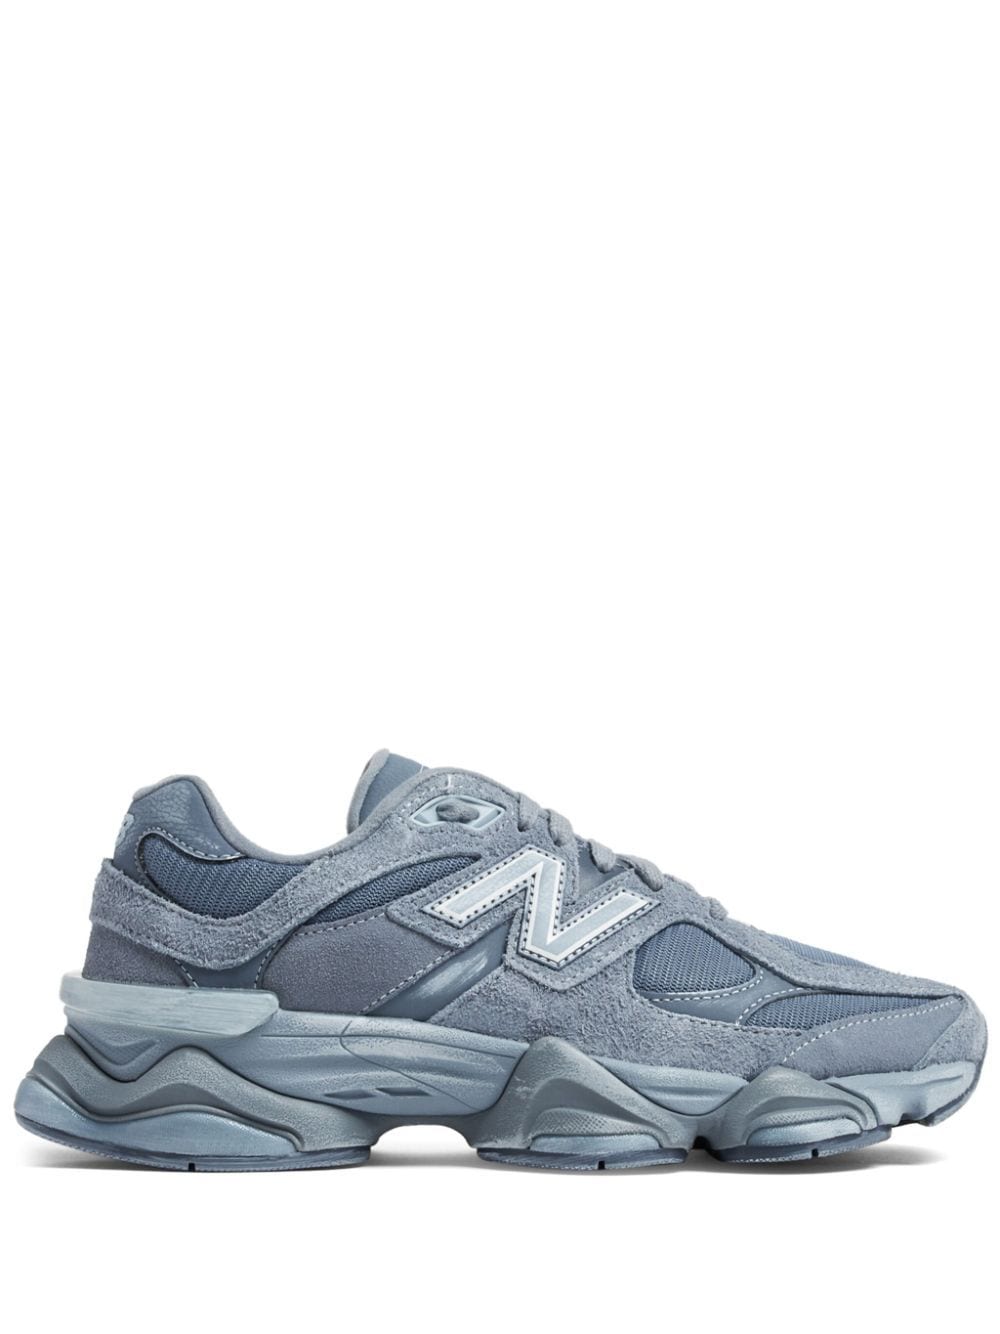 New Balance 9060 suede sneakers - Grey